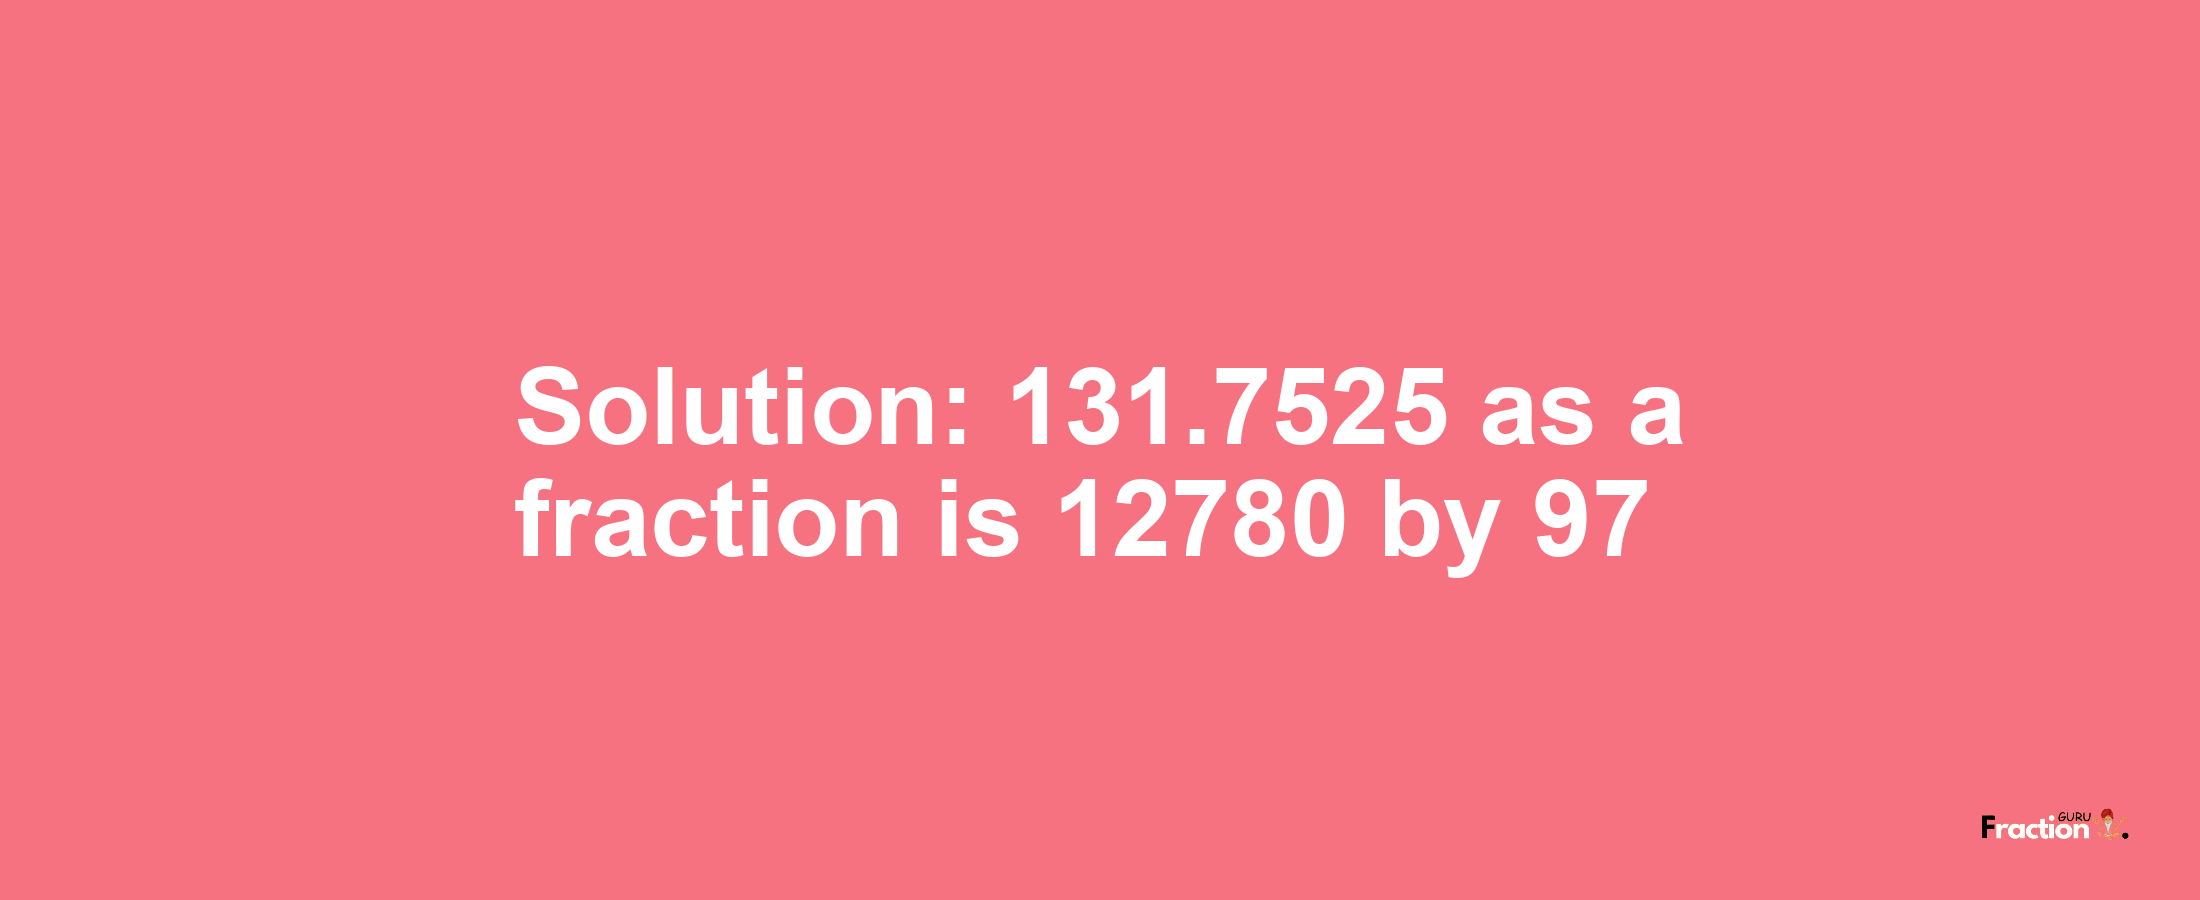 Solution:131.7525 as a fraction is 12780/97